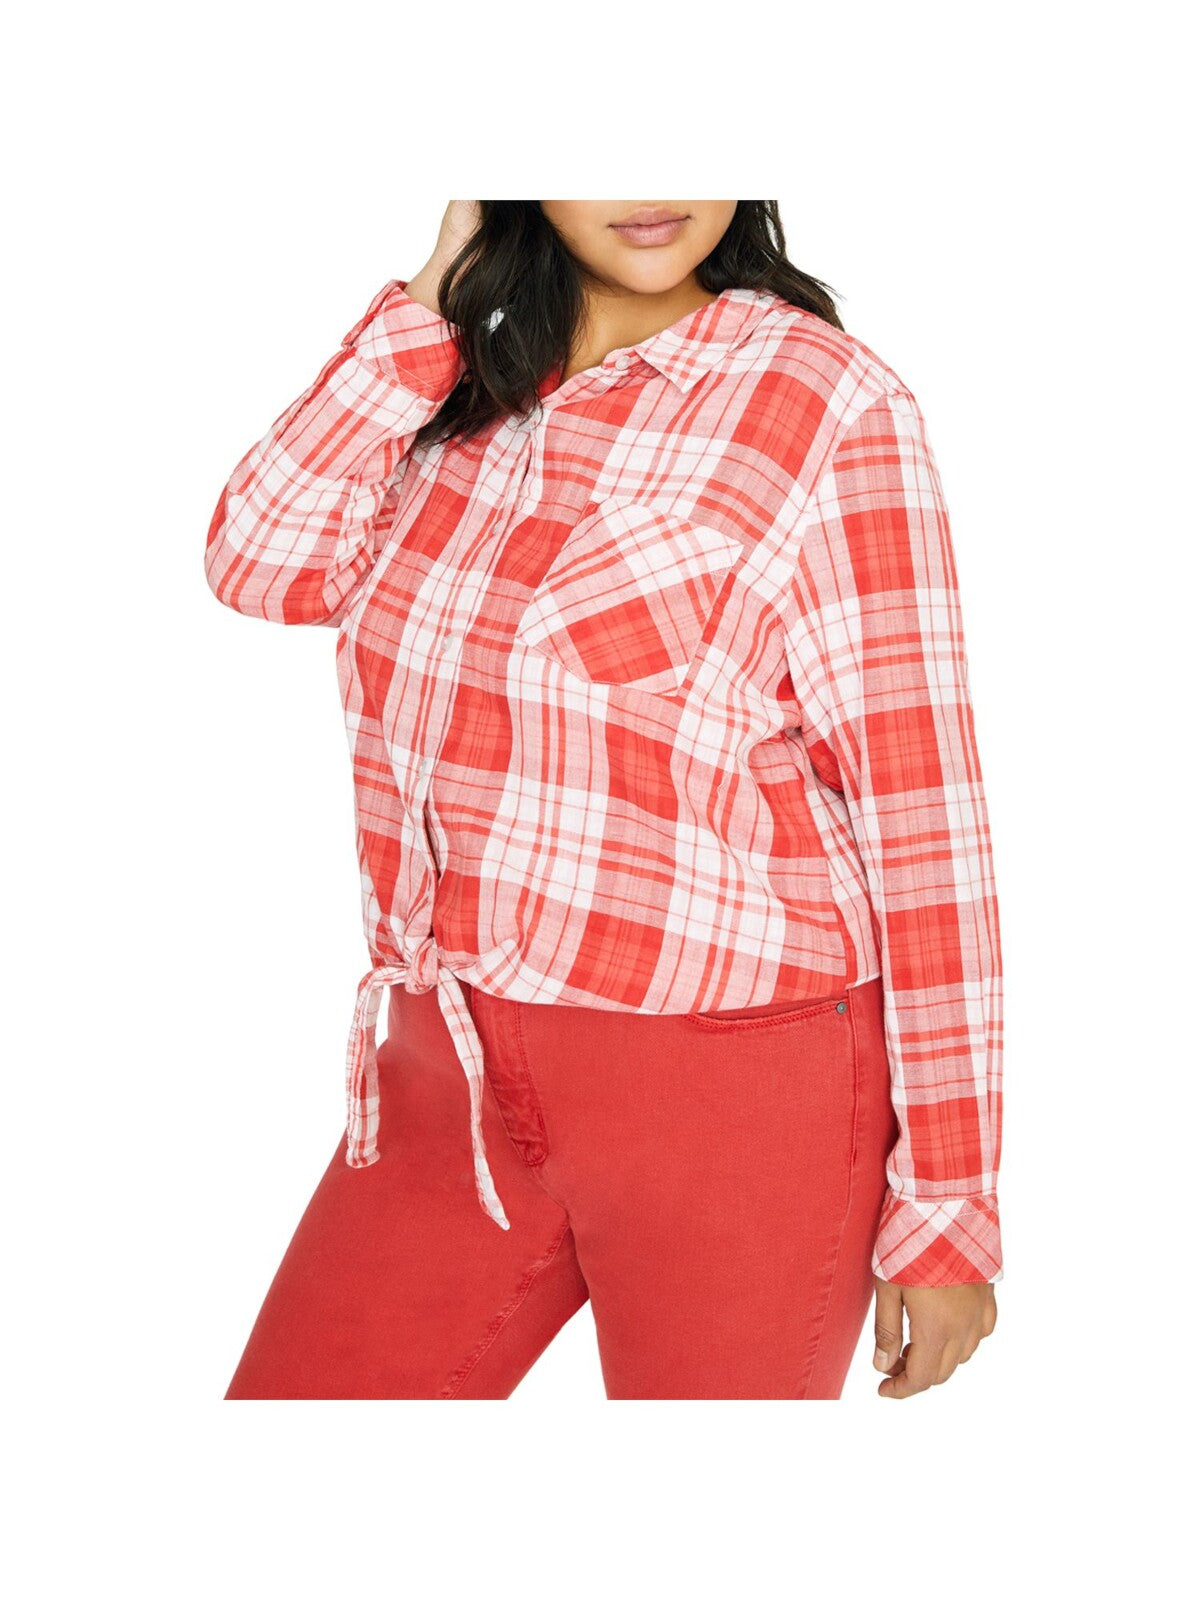 SANCTUARY Womens Red Pocketed Tie Front Plaid Cuffed Sleeve Collared Button Up Top Plus 2X